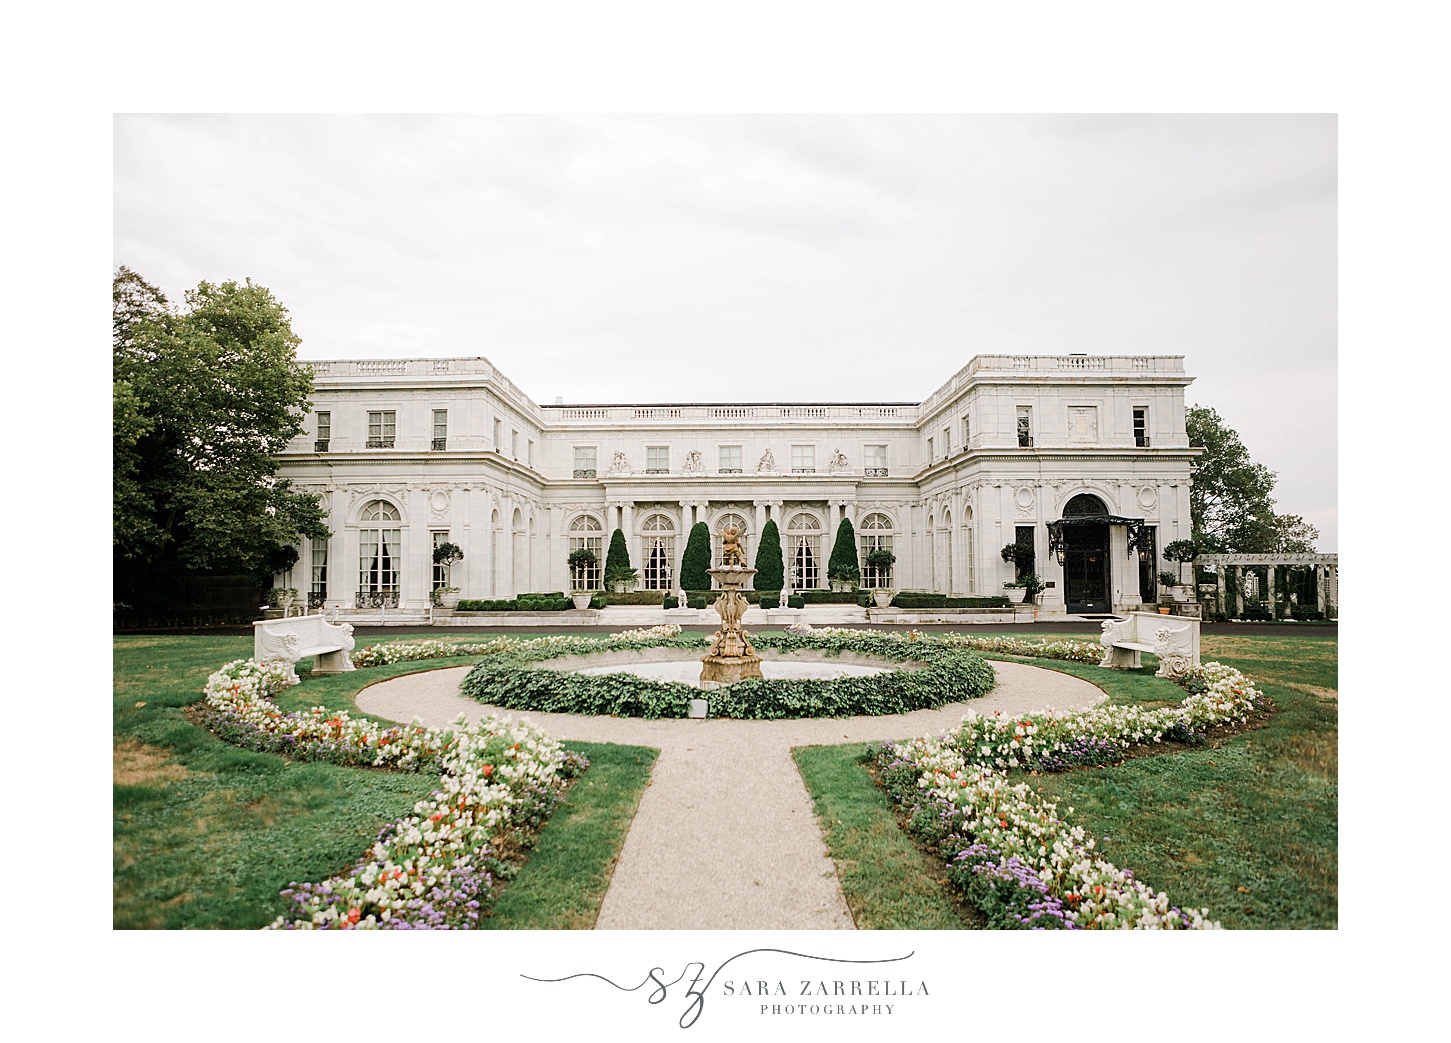 Rosecliff Mansion wedding inspired by Great Gatsby in Newport RI